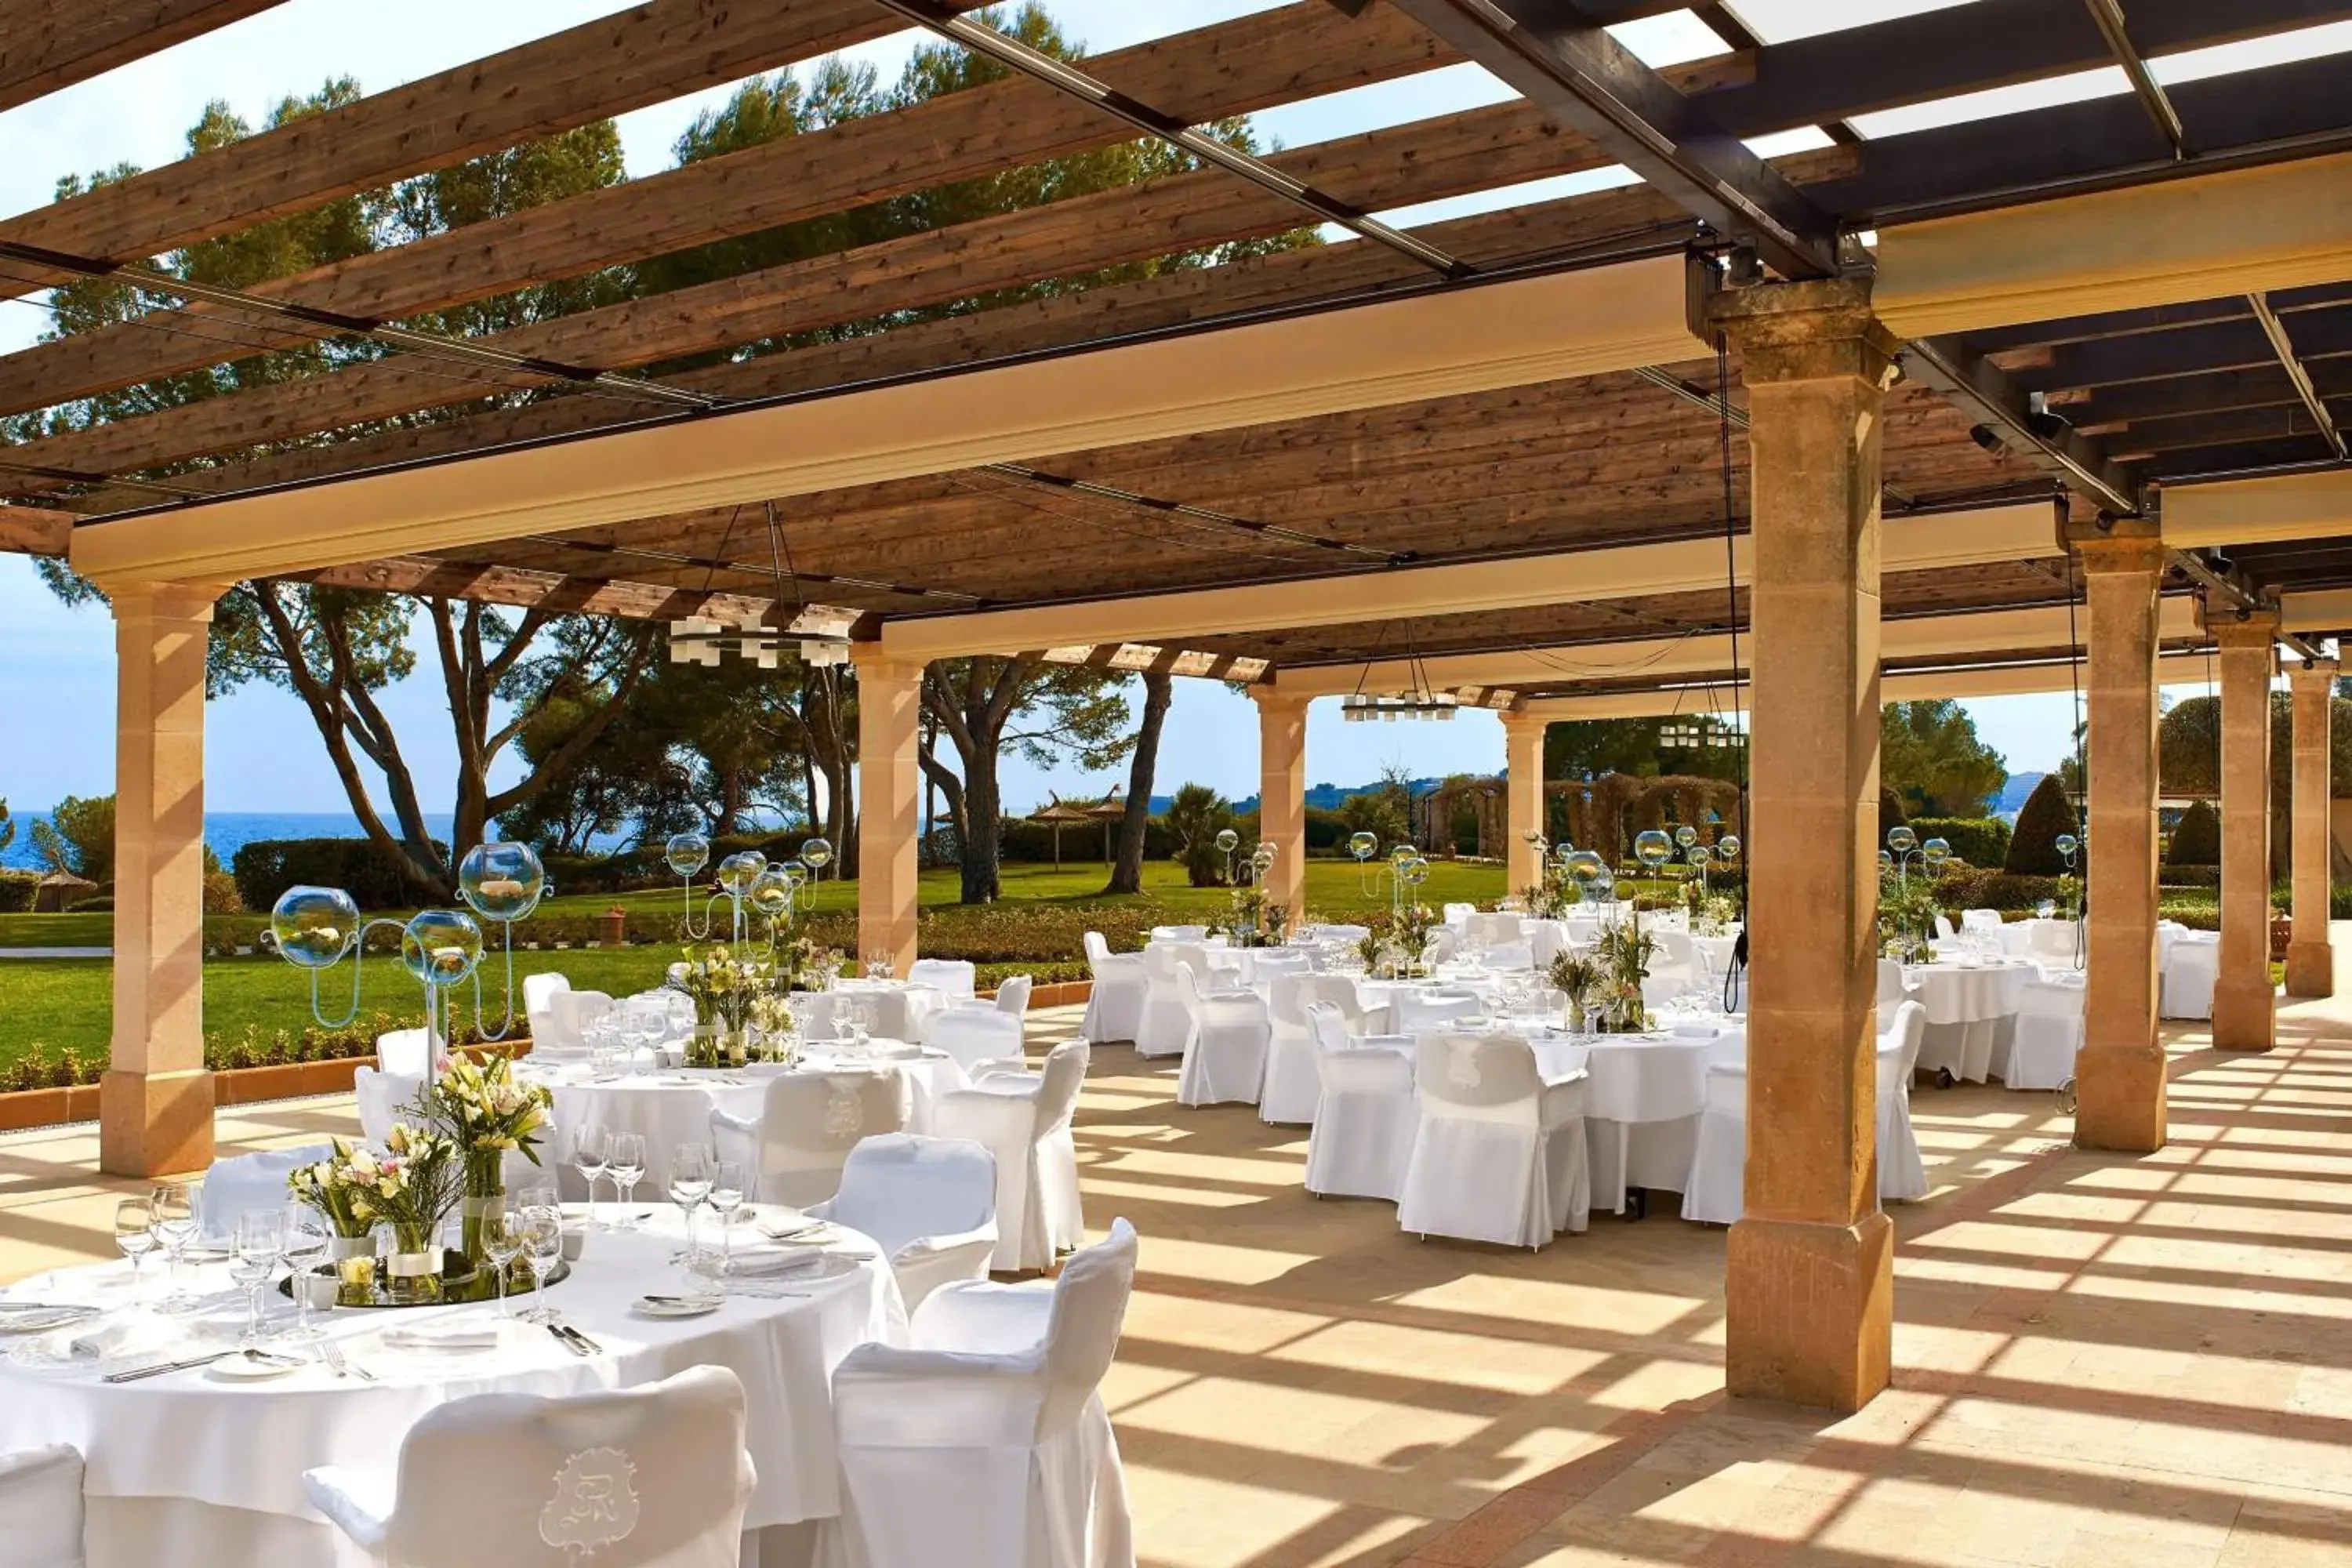 Meeting/conference room, Banquet Facilities in The St. Regis Mardavall Mallorca Resort